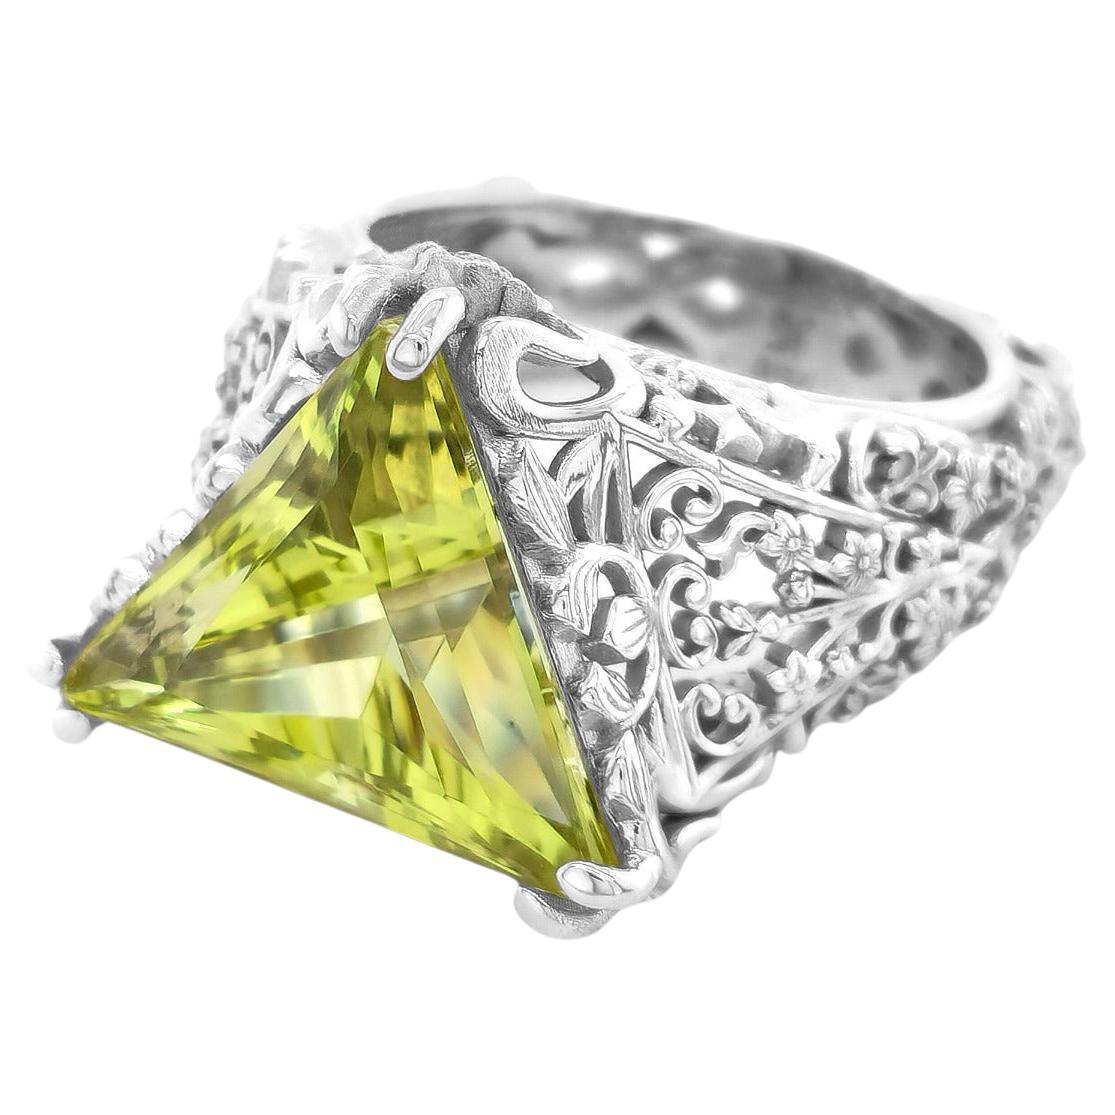 7.87 Carats Greenish Yellow Beryl set in 18K White Gold Ring For Sale